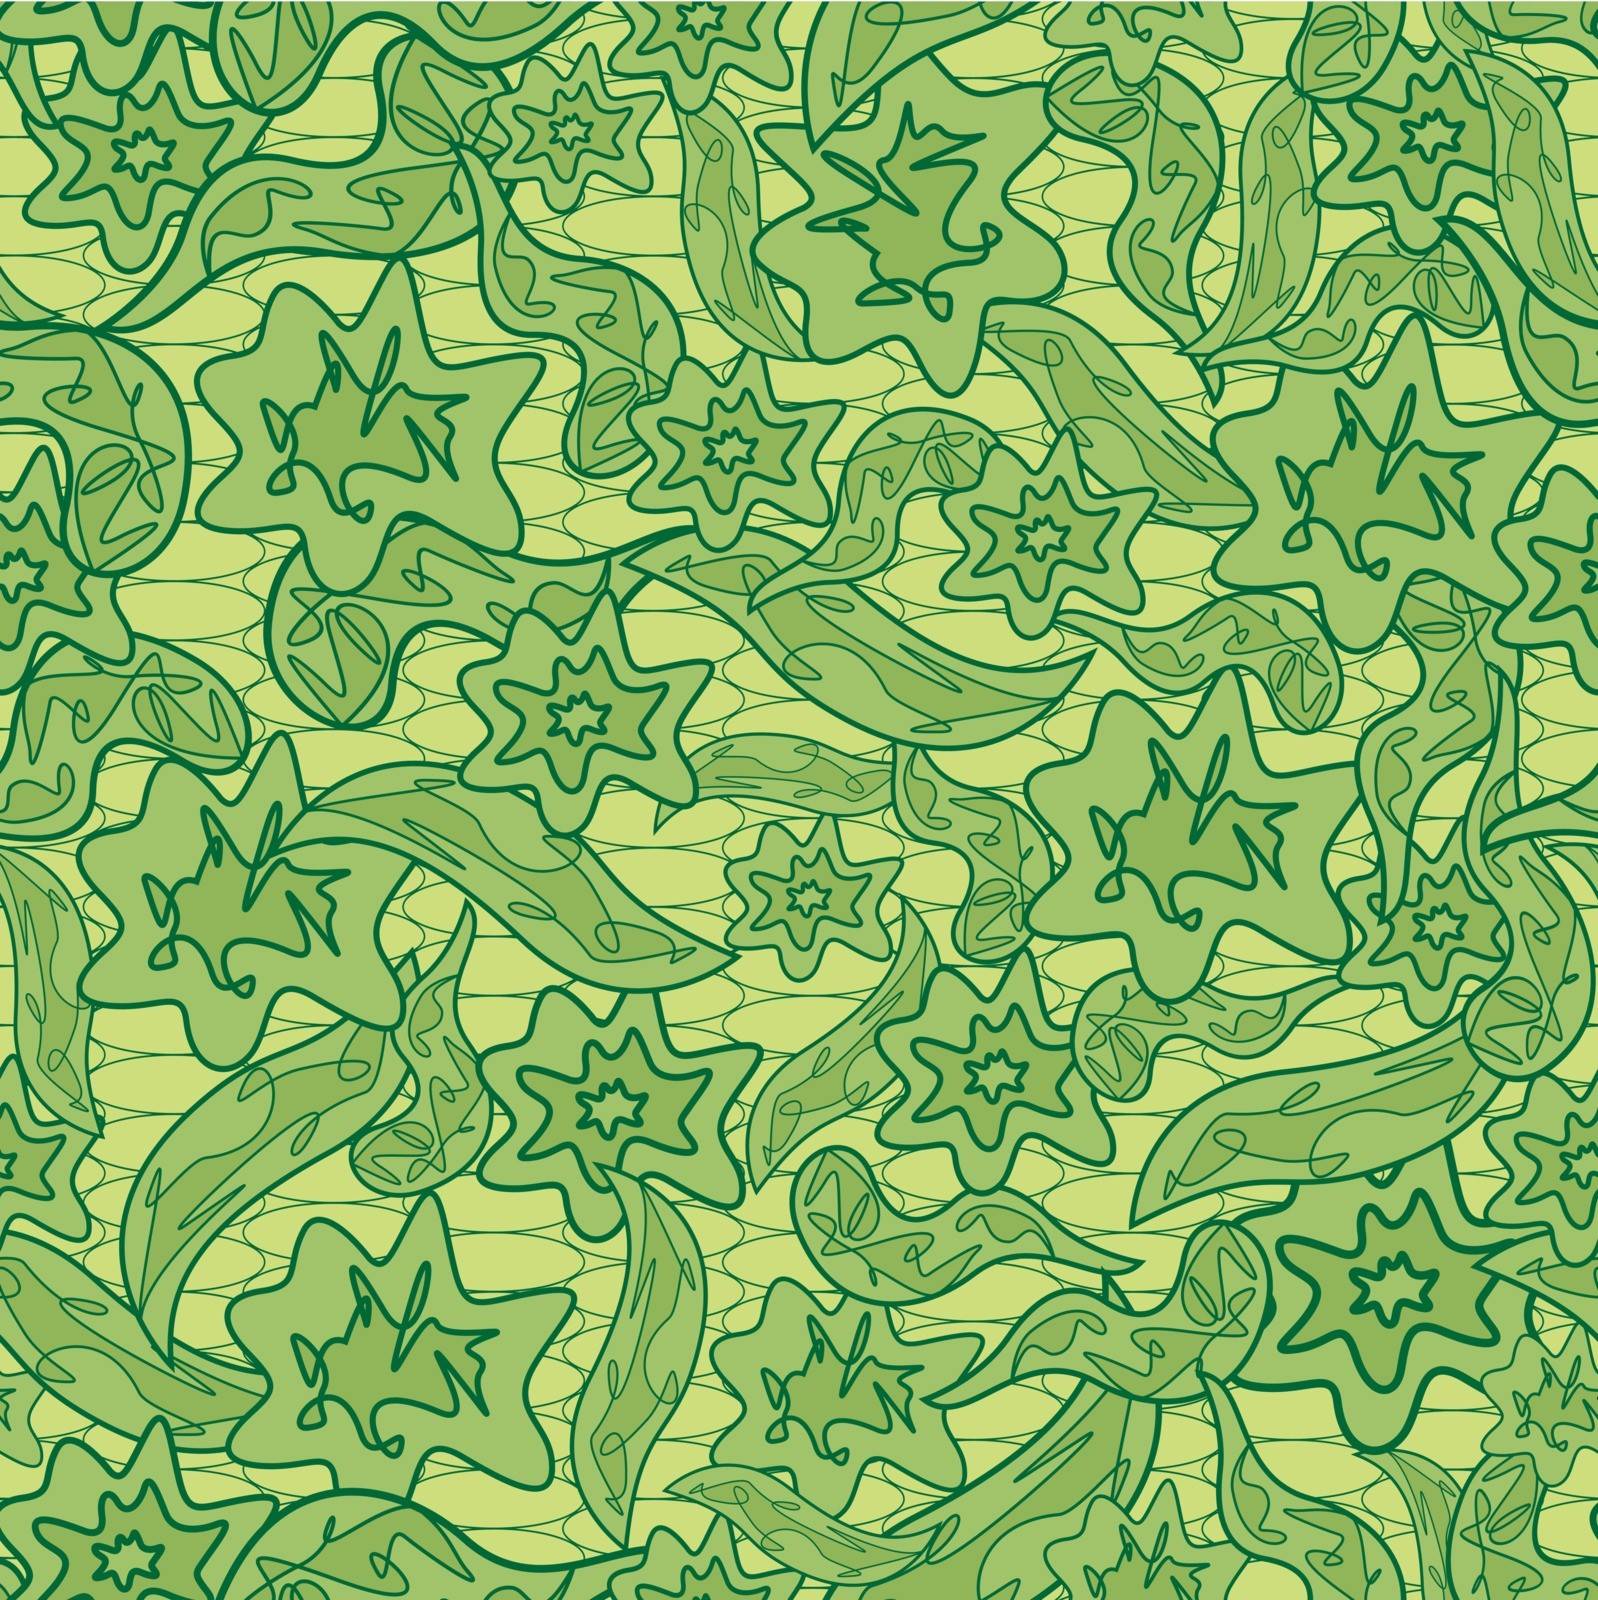 Abstract herbal camouflage pattern by natareal